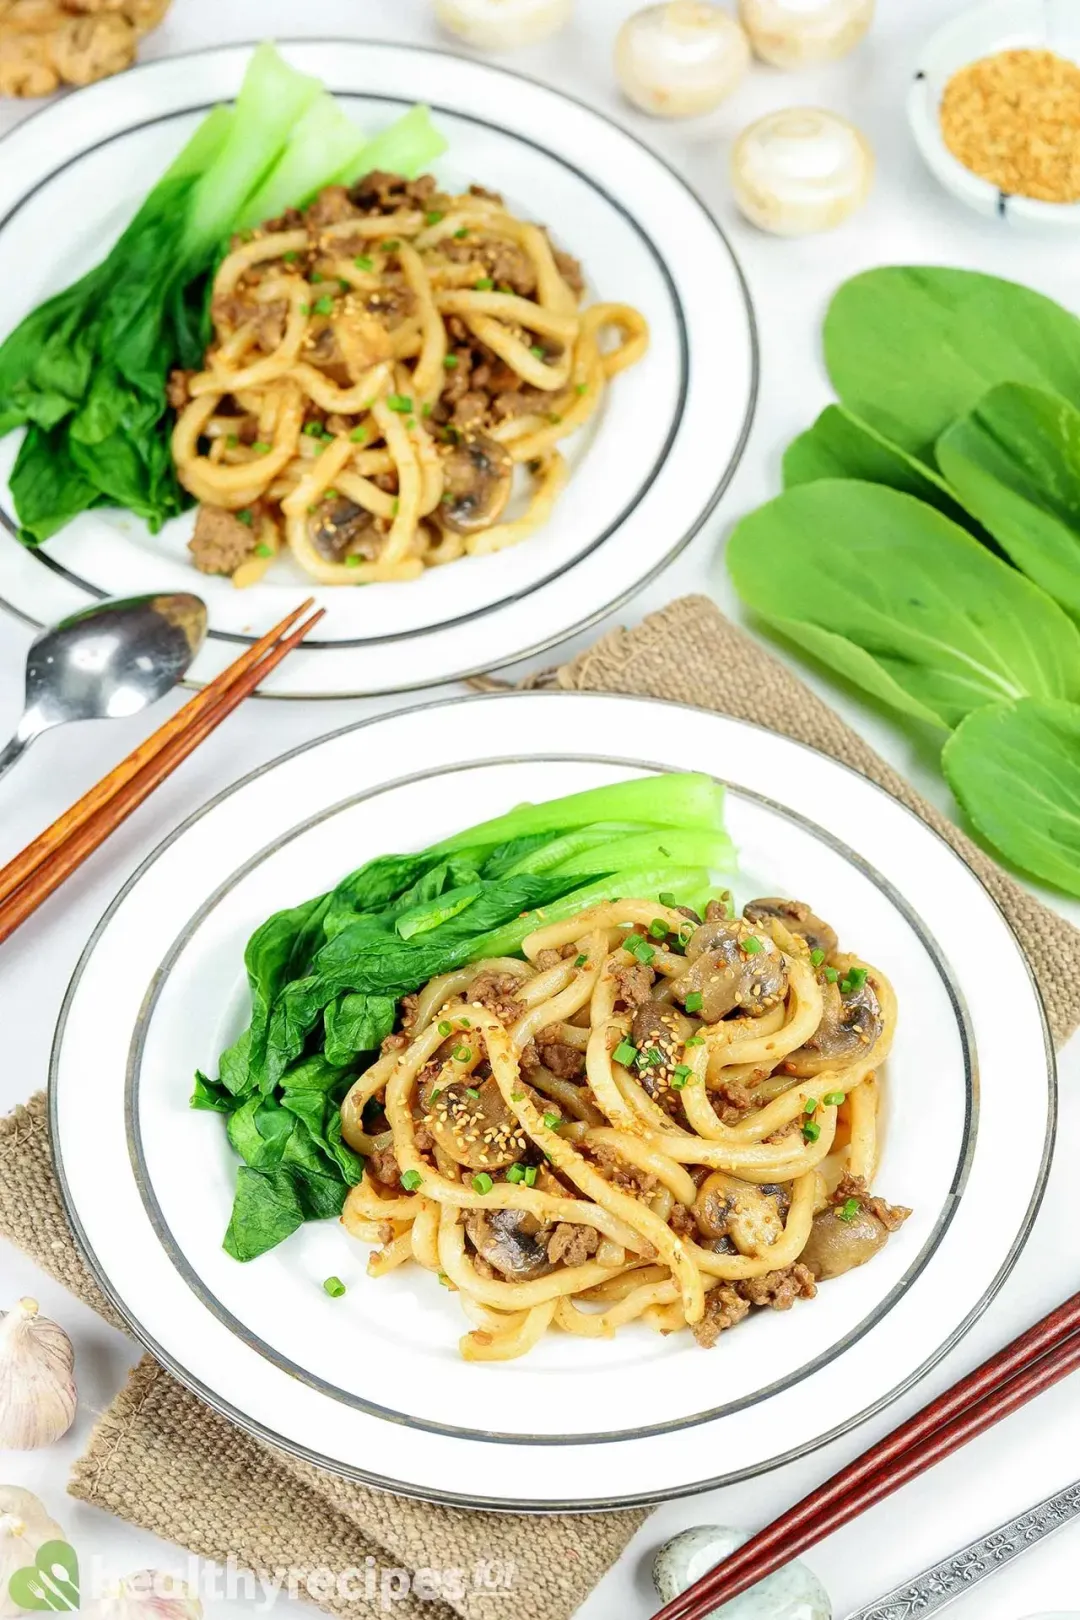 Tips for Cooking Asian Beef and Noodles